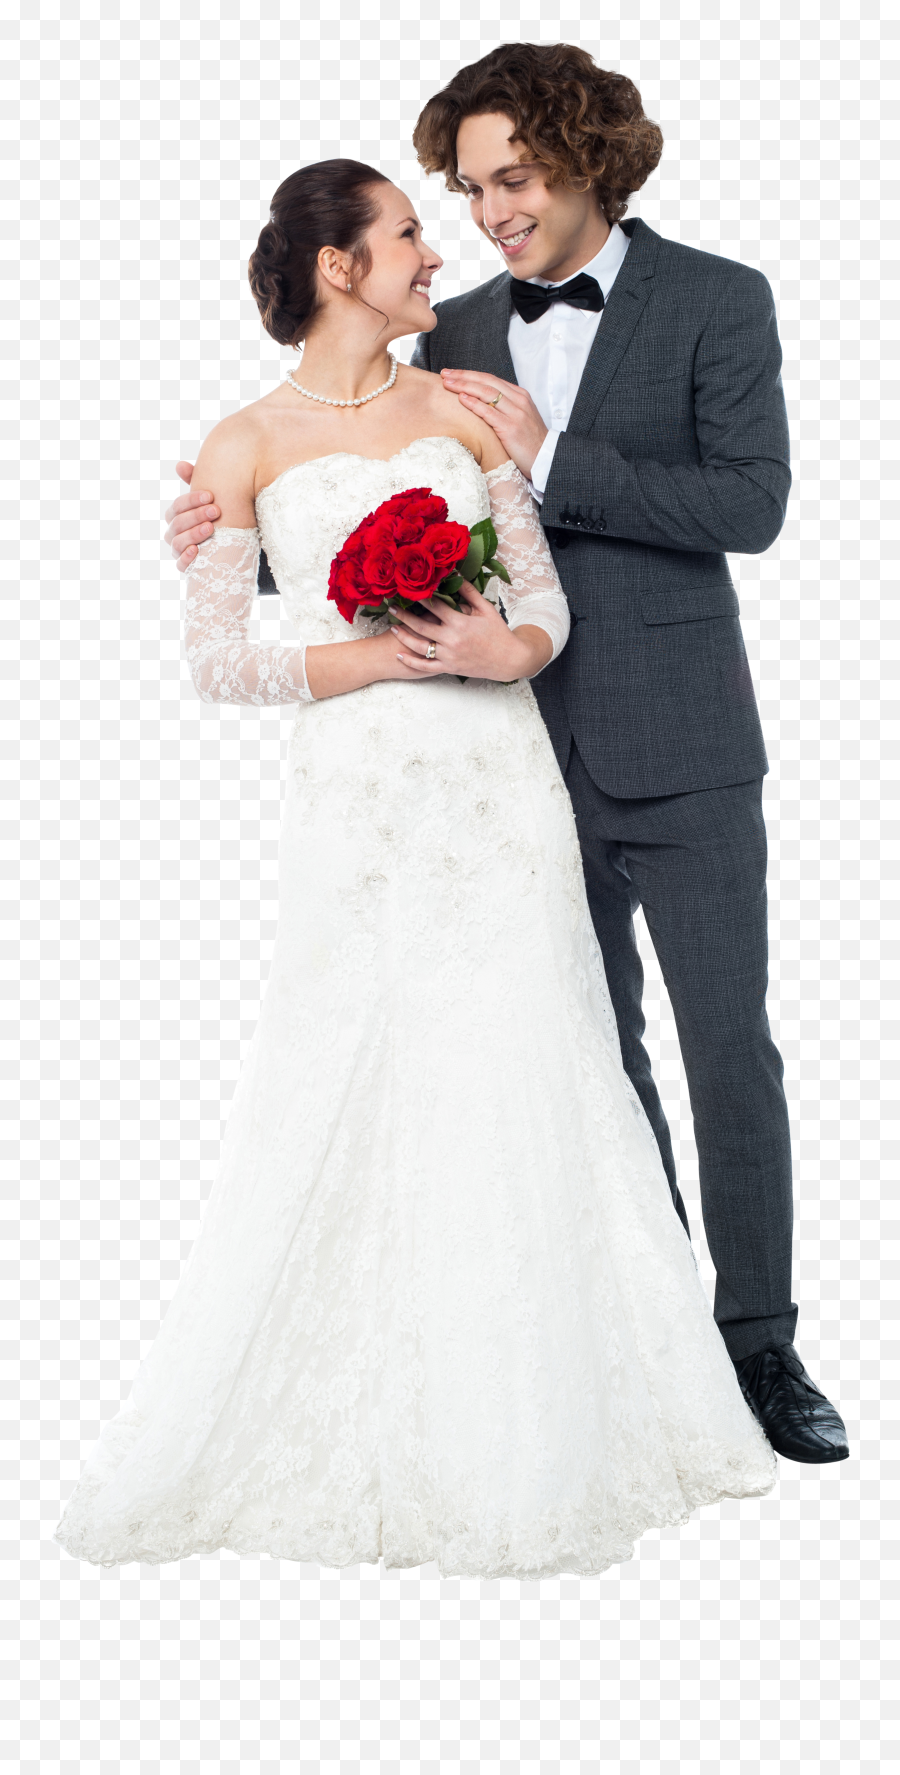 Download Wedding Couple Png Image For Free - Transparent Marriage Couple Png,Couple Png